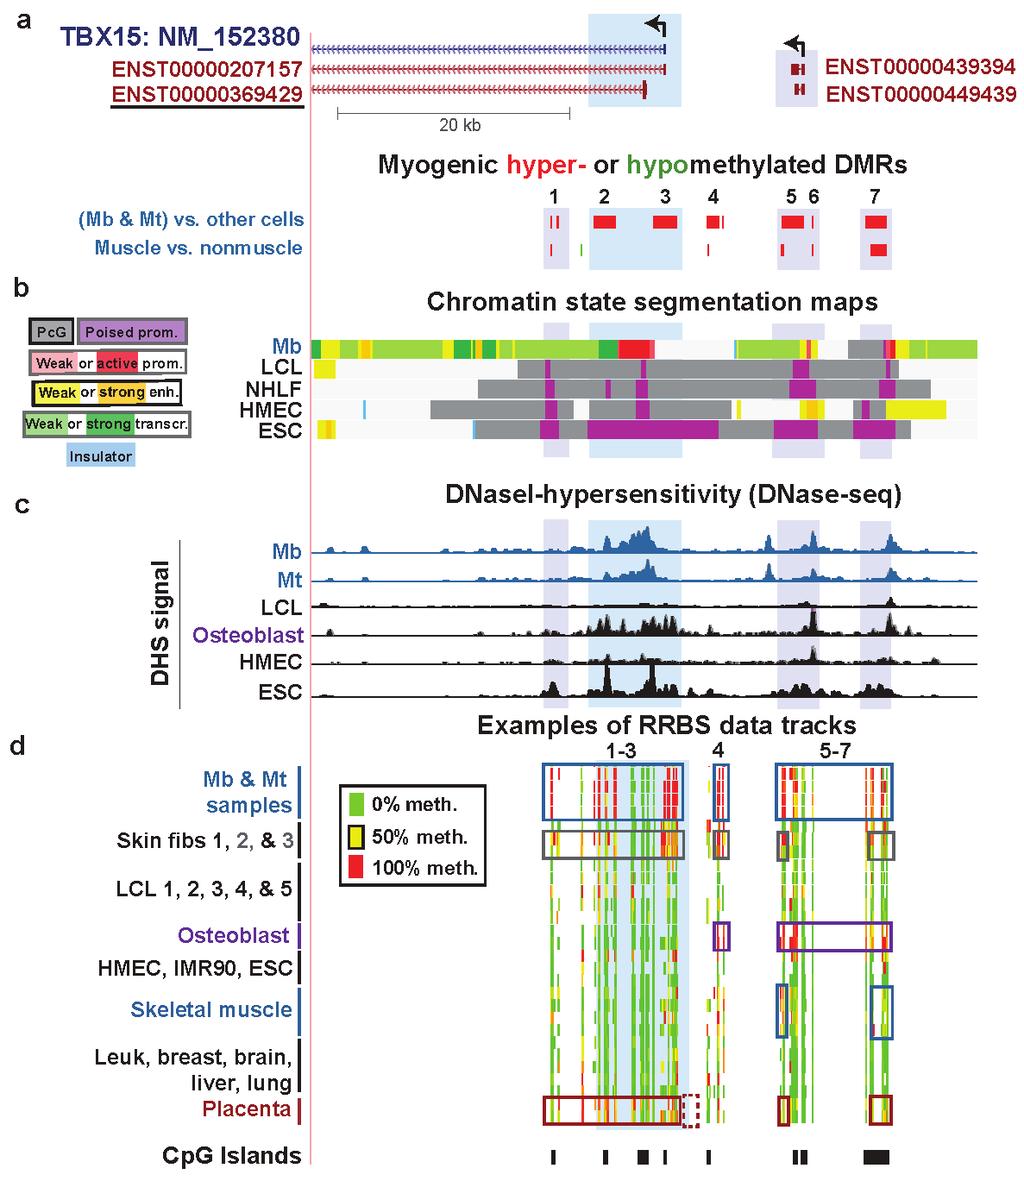 Biology 2014, 3 438 Figure 4. Association of hypermethylated myogenic DMRs with boundaries of active promoter-like chromatin in TBX15 and further upstream.